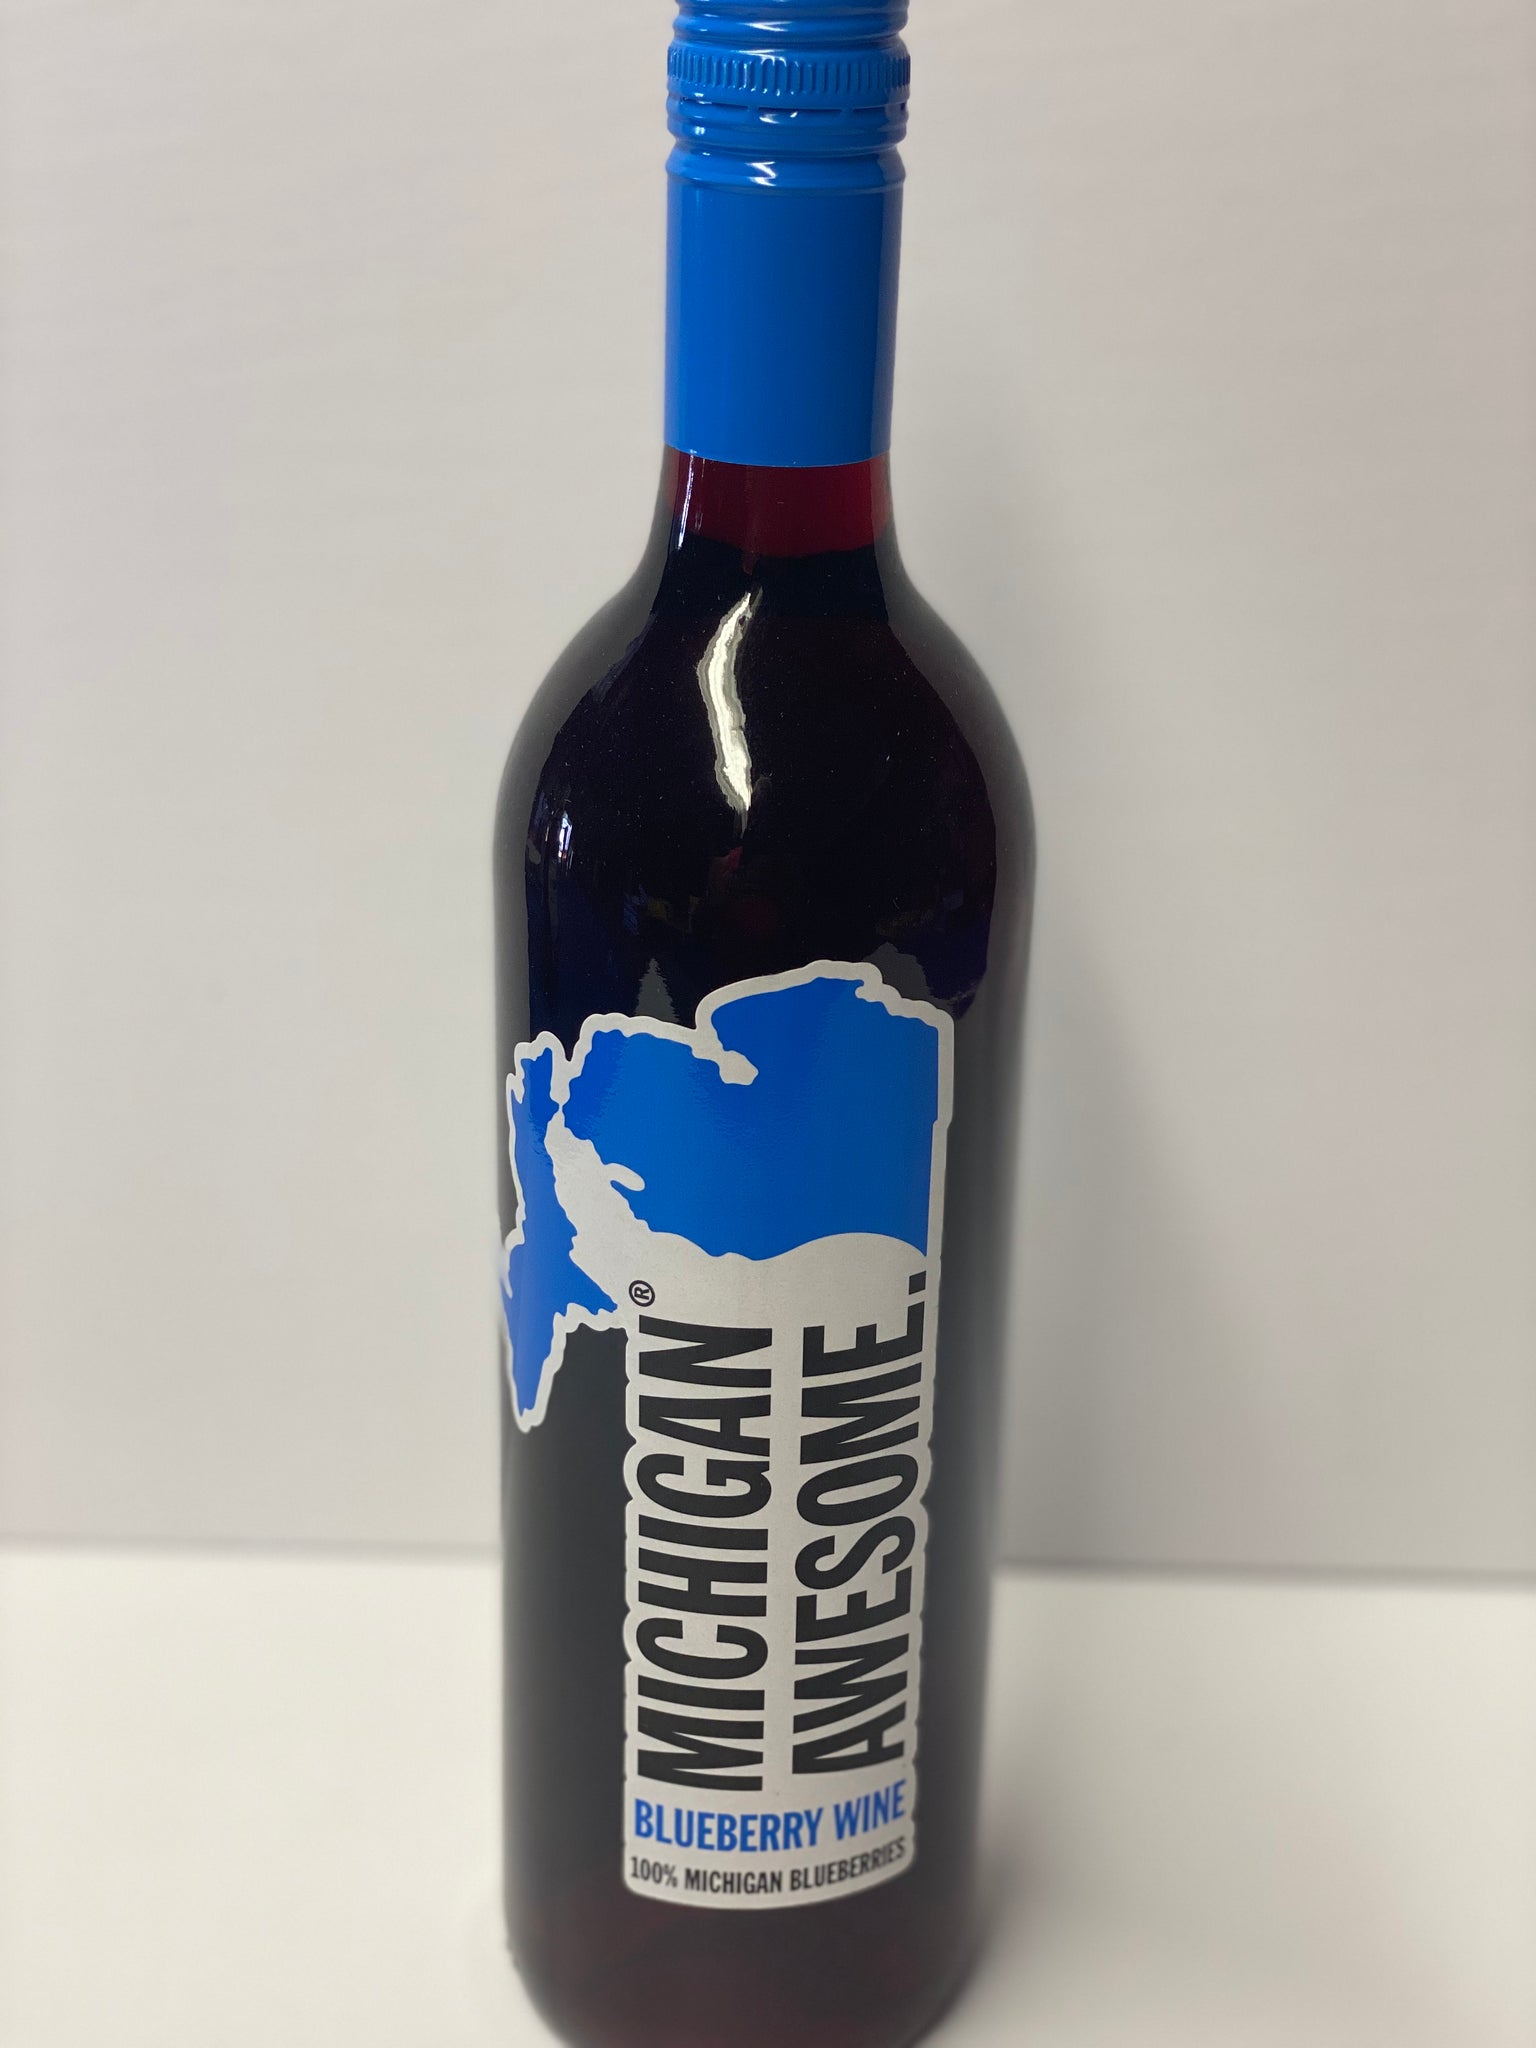 Blueberry Wine - Delivery only.  Must be present for age verification.